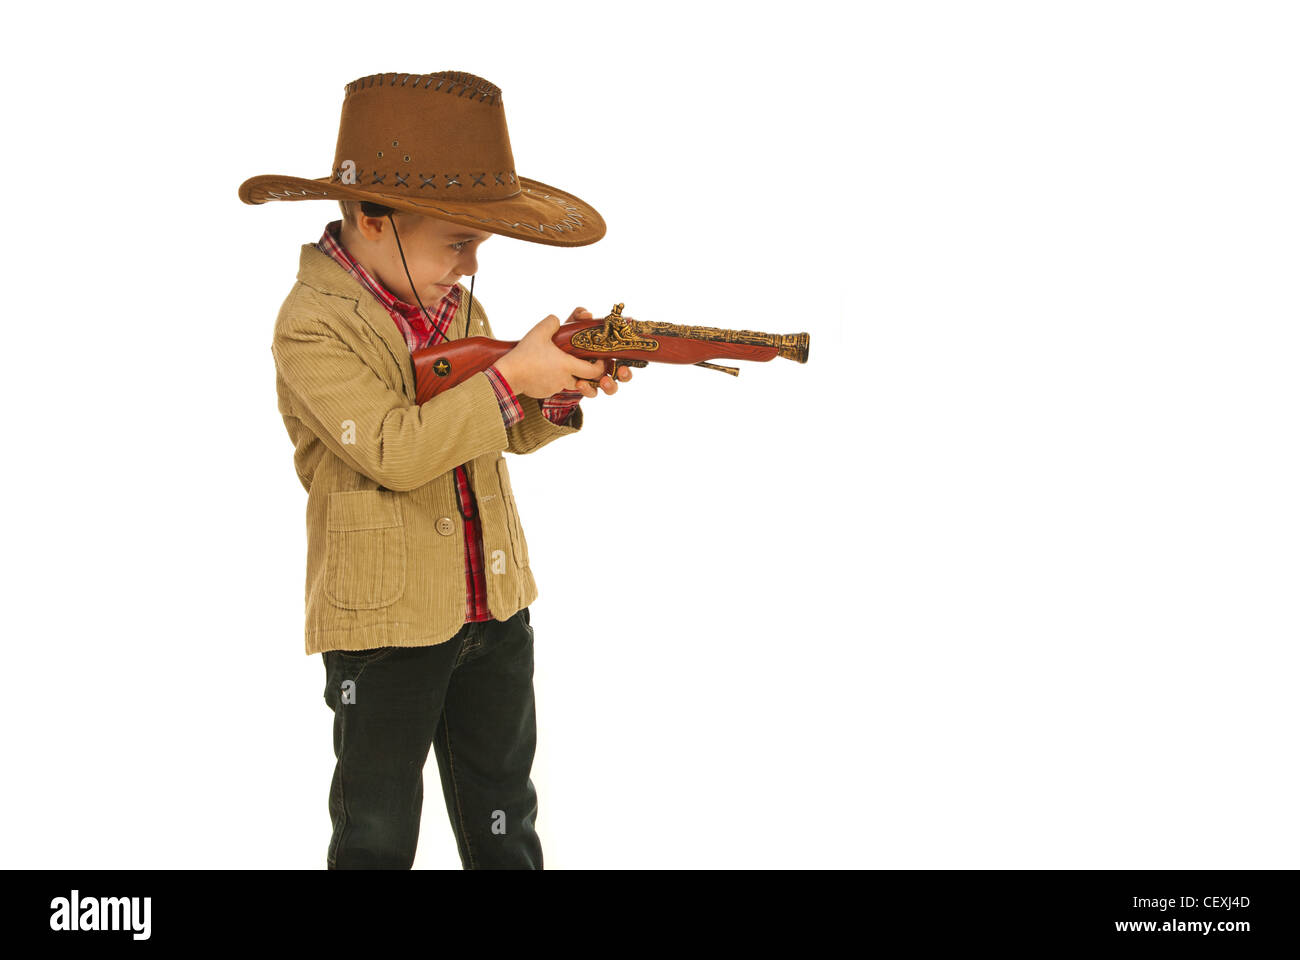 Little cowboy shooting with weapon toy in profile isolated on white background Stock Photo